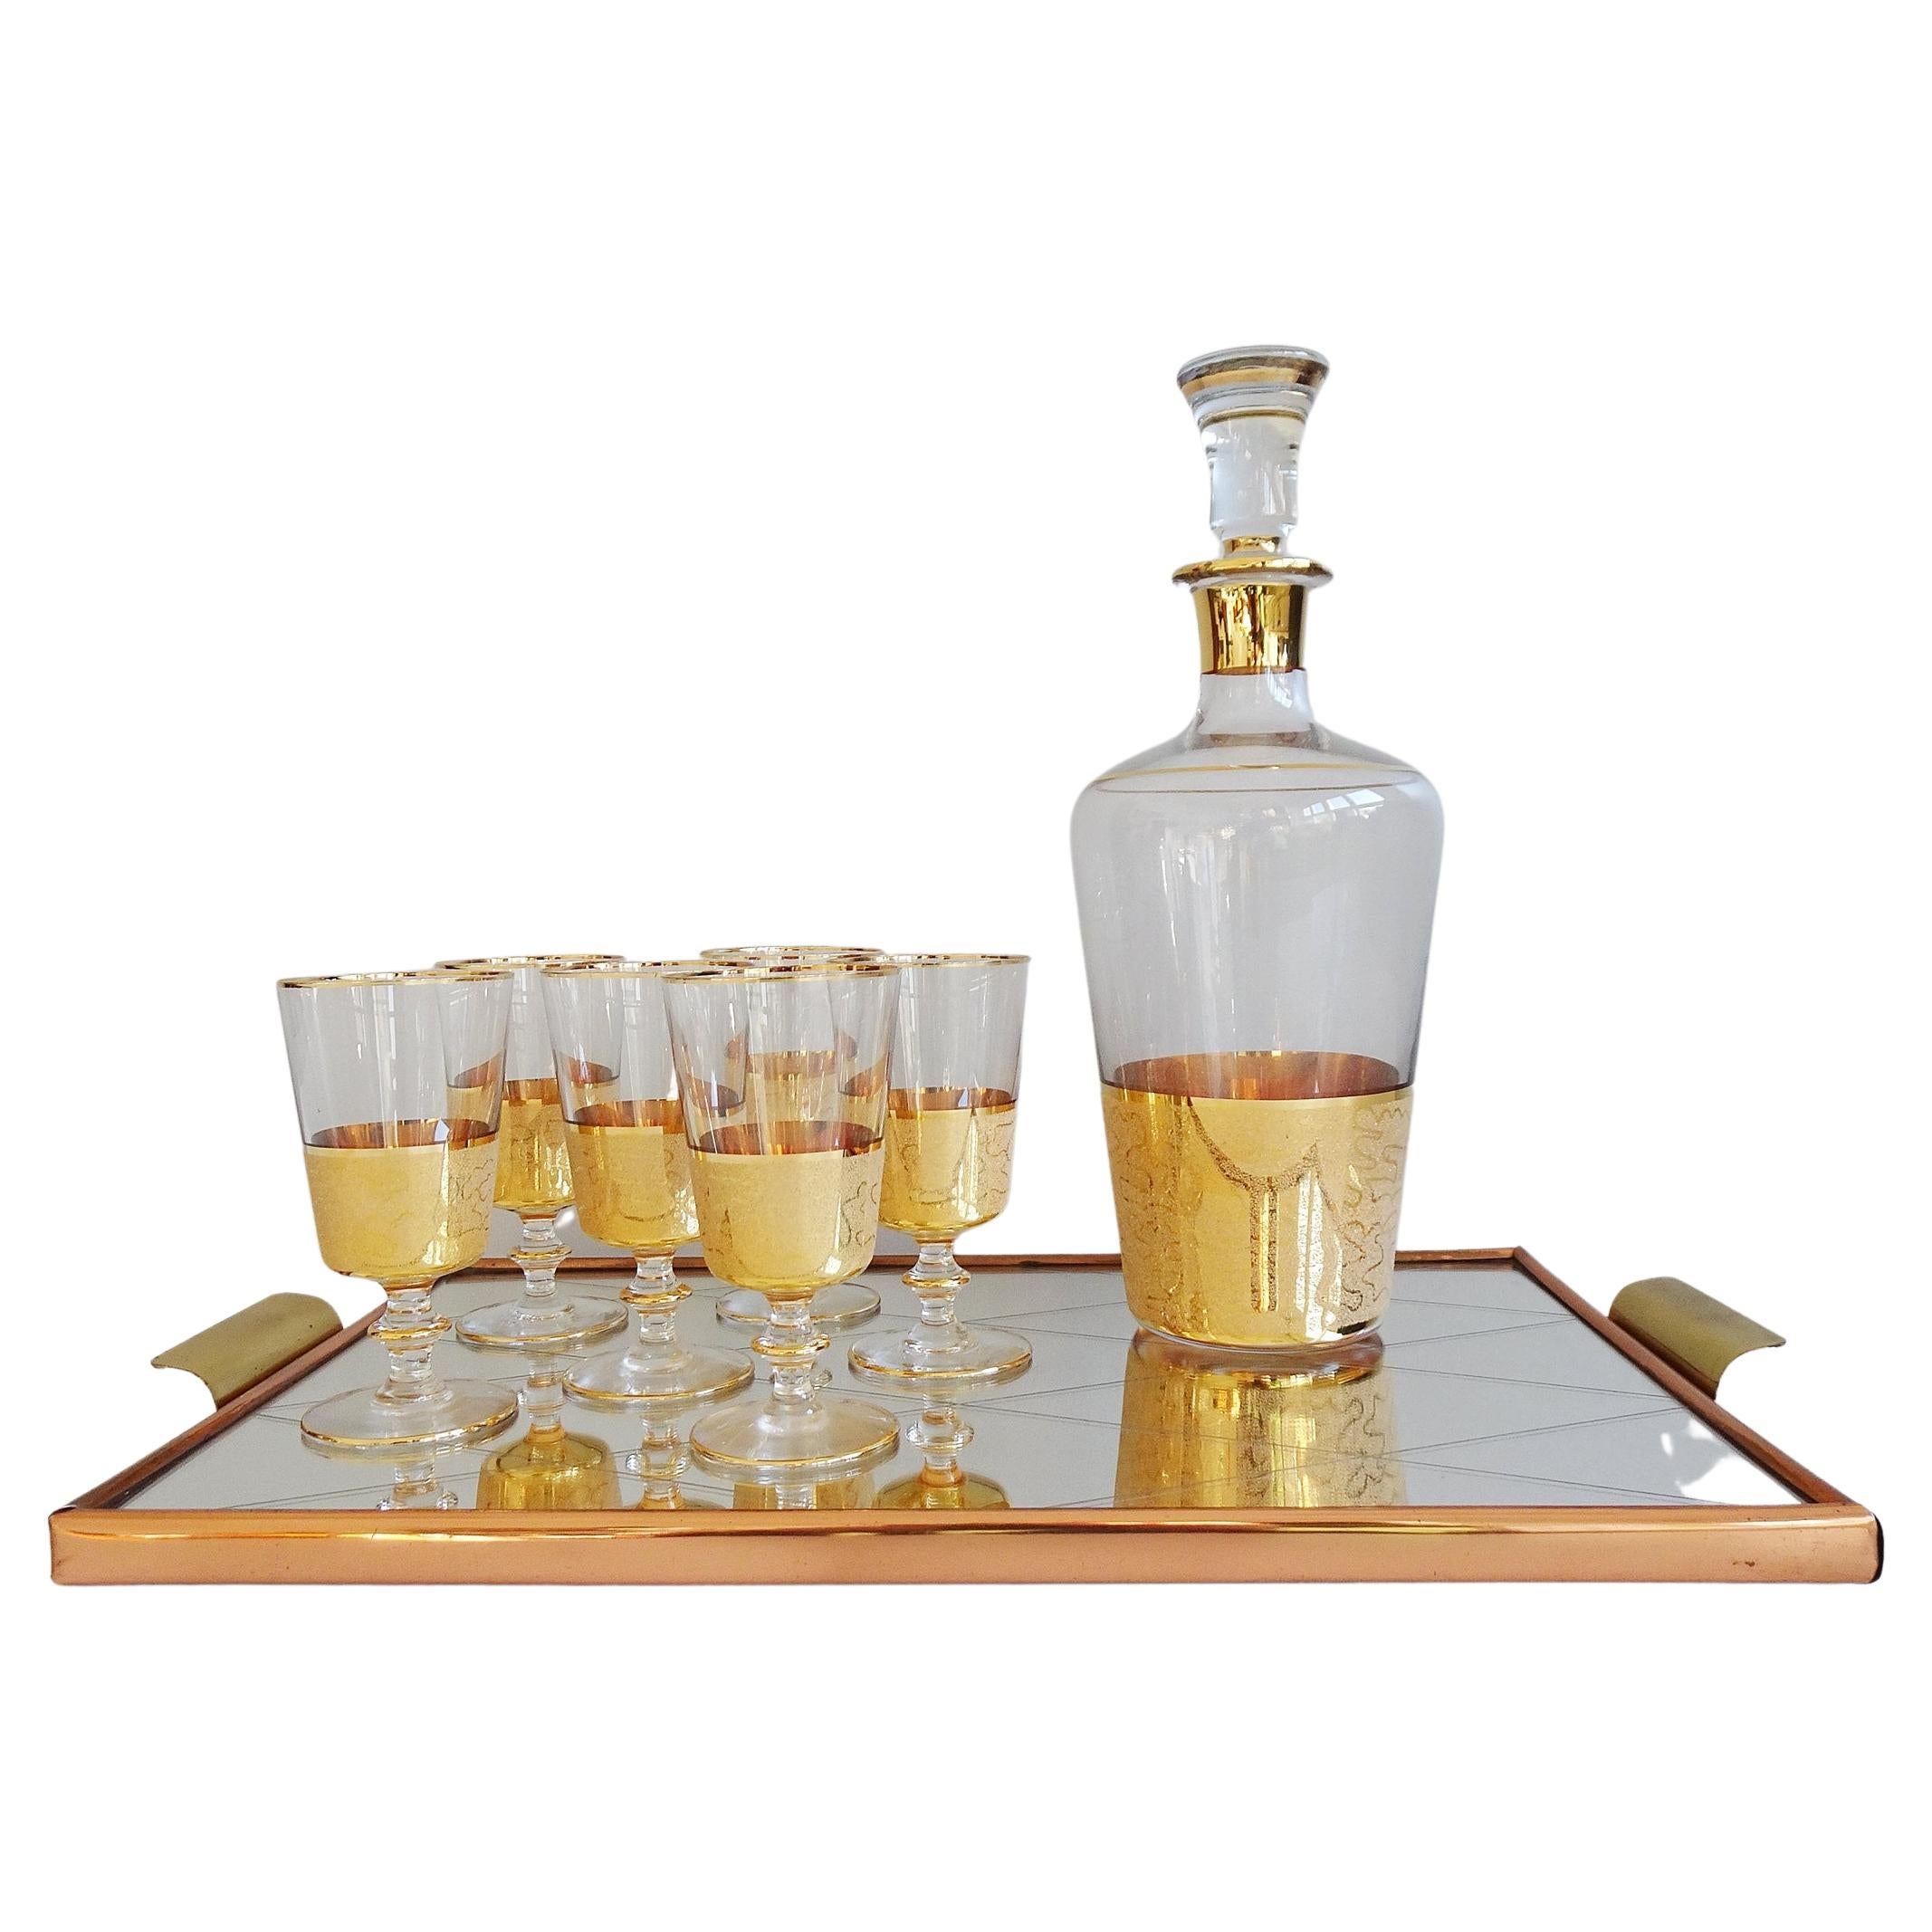 Stylish bar set consisting of a liqueur carafe with six glasses and a tray. A fancy and noble bar accessory from the mid century that convinces with color and design. A glass carafe with a cap and six liqueur glasses, with a gold decor typical of